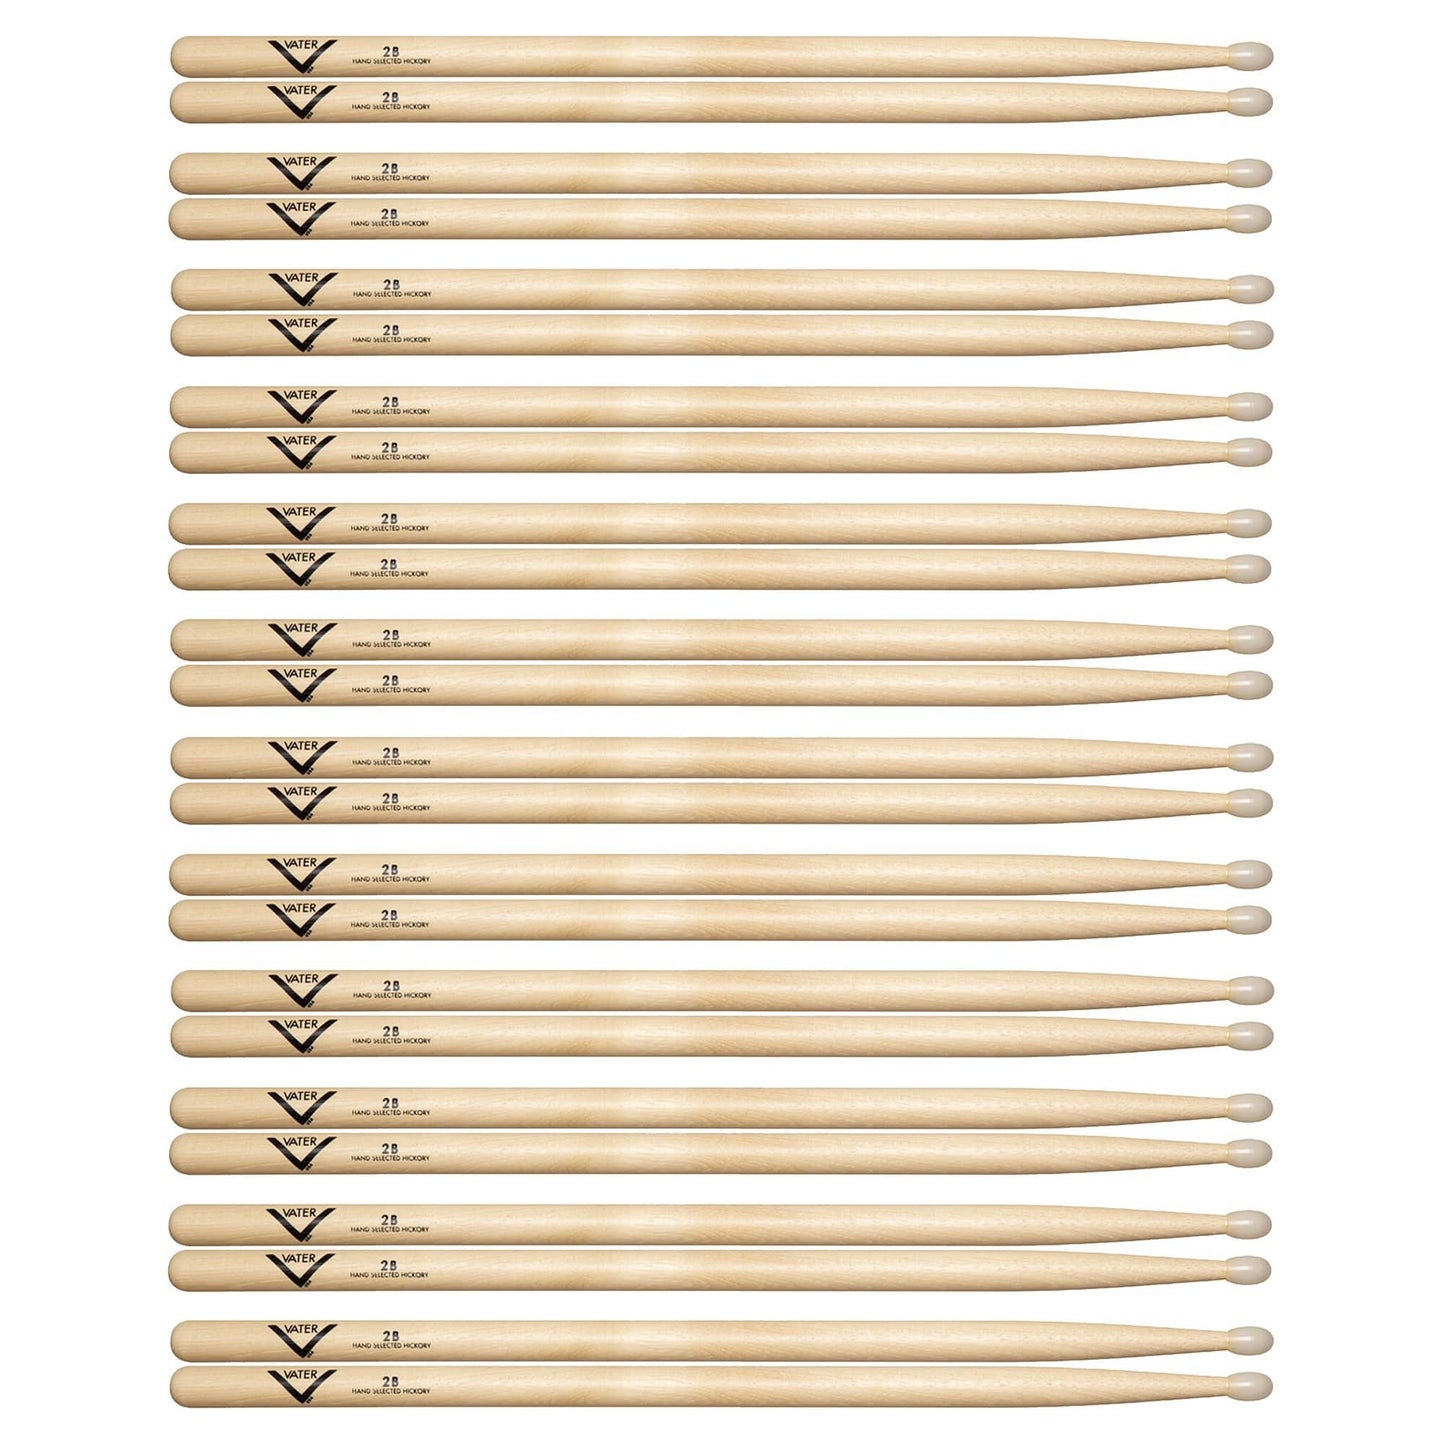 Vater Hickory 2B Nylon Tip Drum Sticks (12 Pair Bundle) Drums and Percussion / Parts and Accessories / Drum Sticks and Mallets